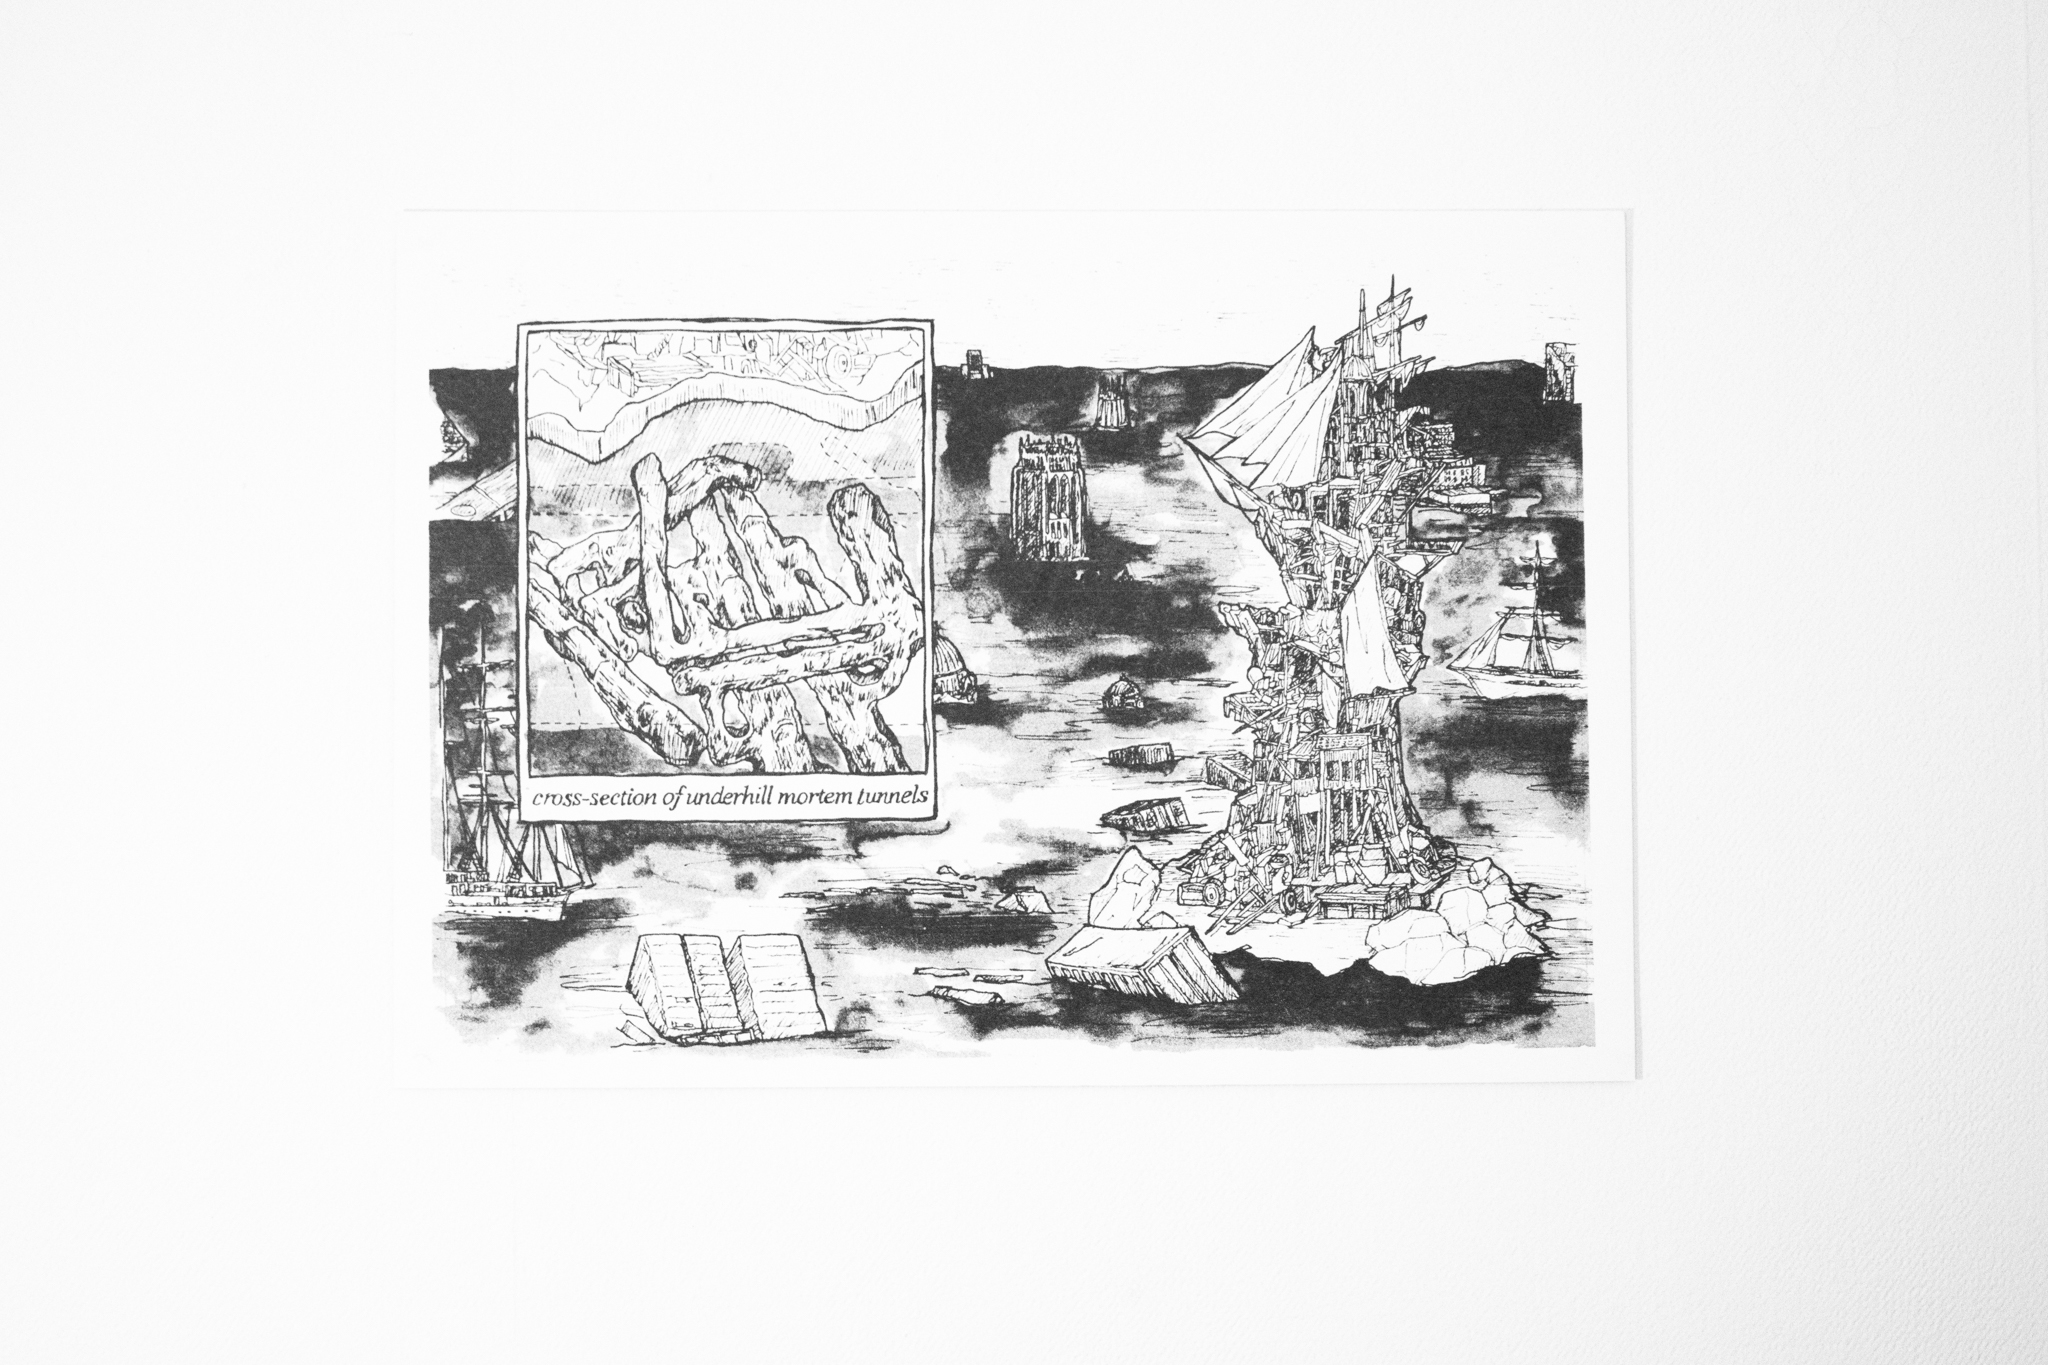 Print by Harriet Burns showing fantasy buildings and seascape